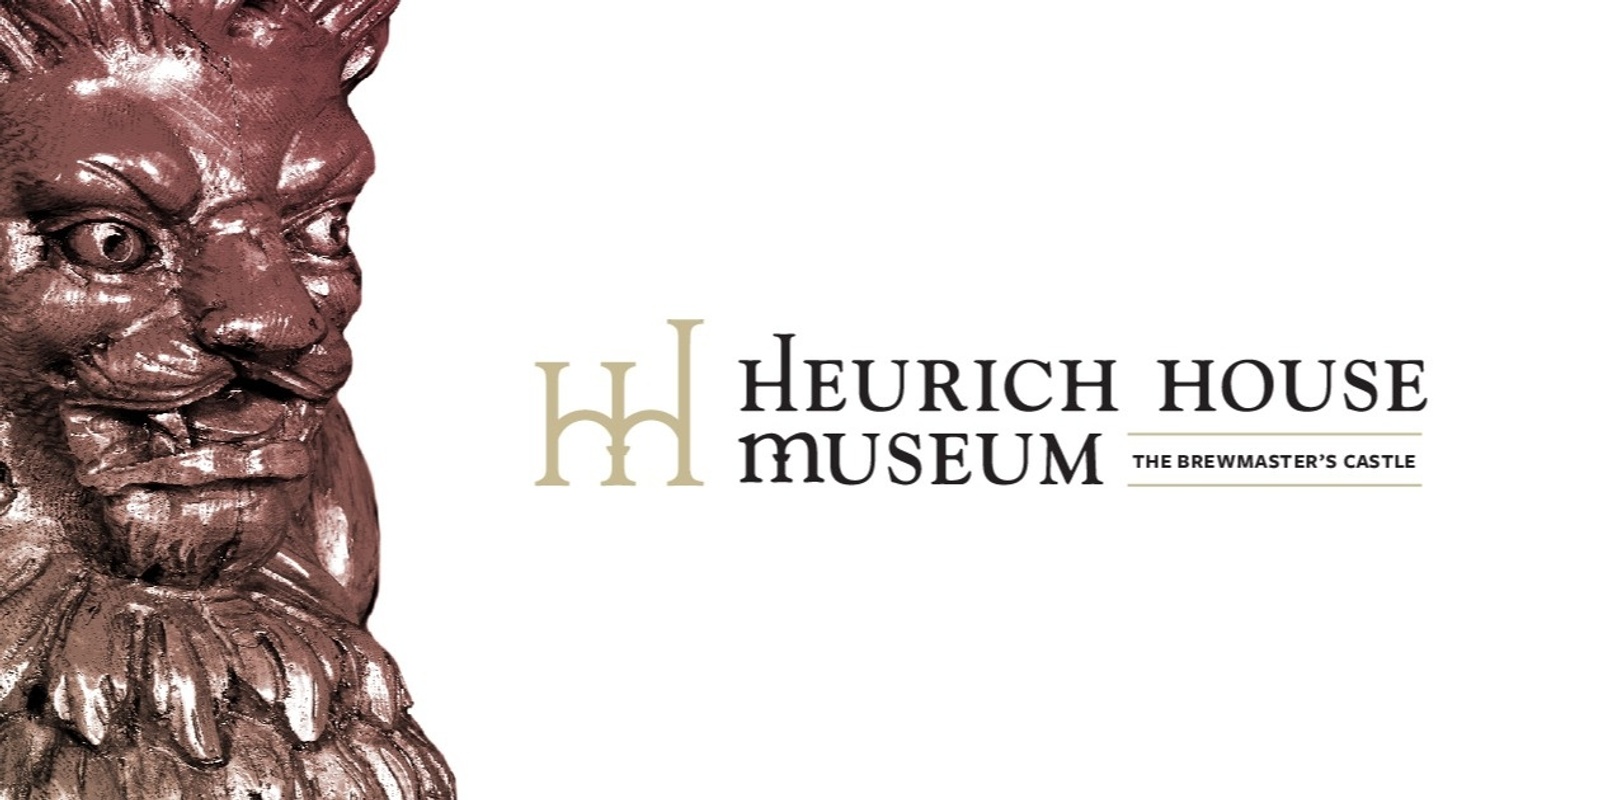 Heurich House Museum's banner